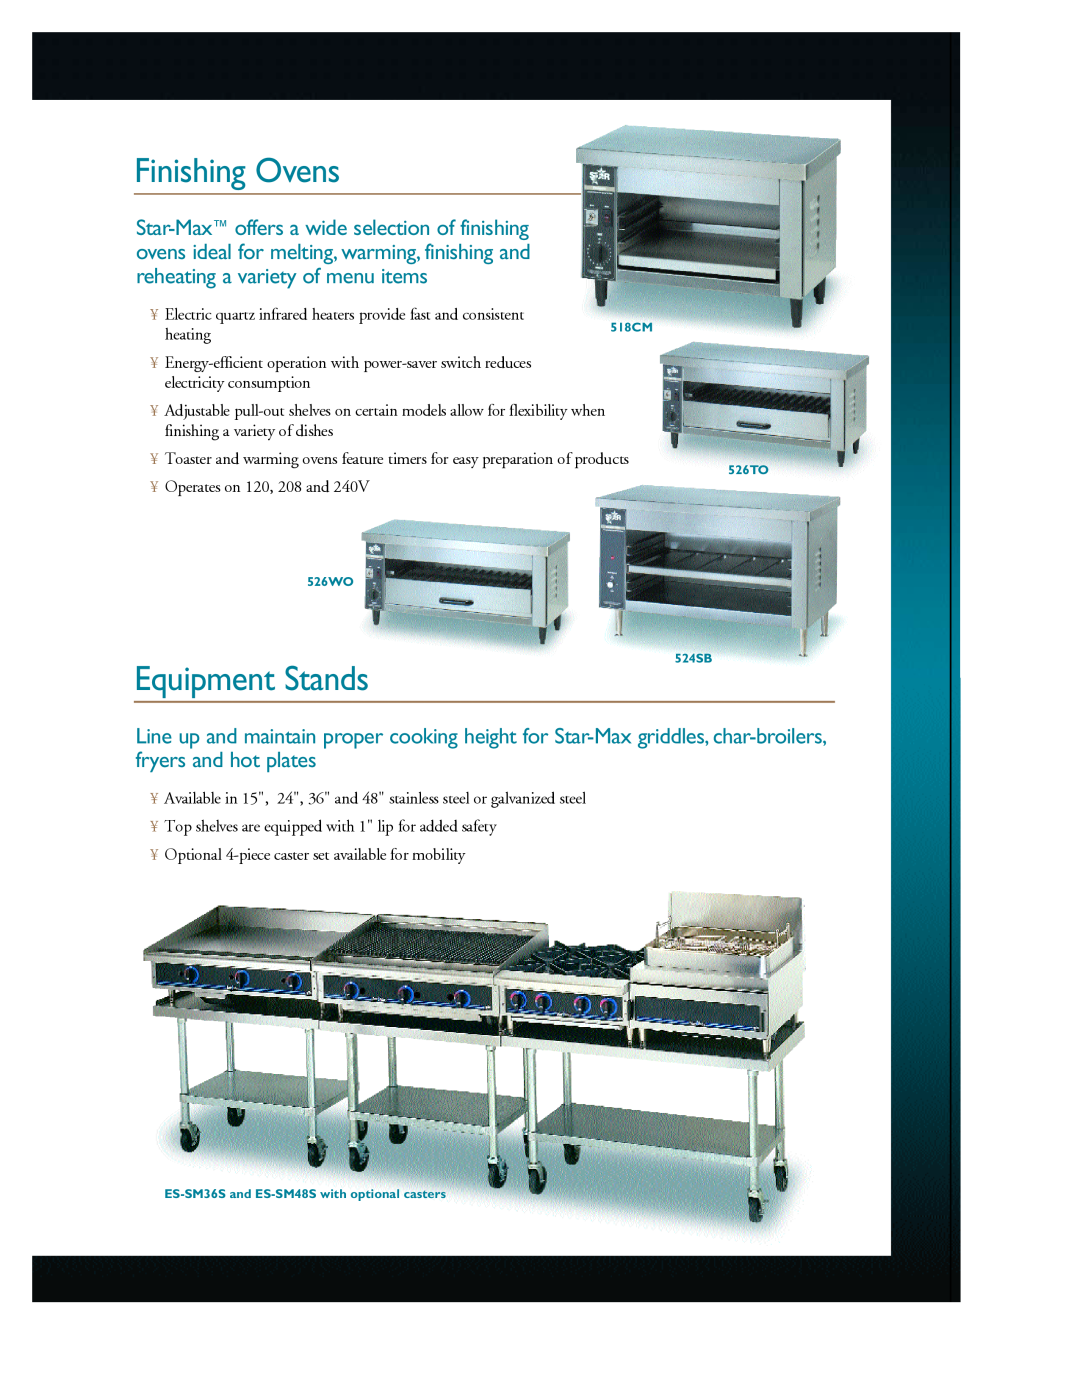 Star Manufacturing Countertop Cooking Equipment manual Finishing Ovens, Equipment Stands 